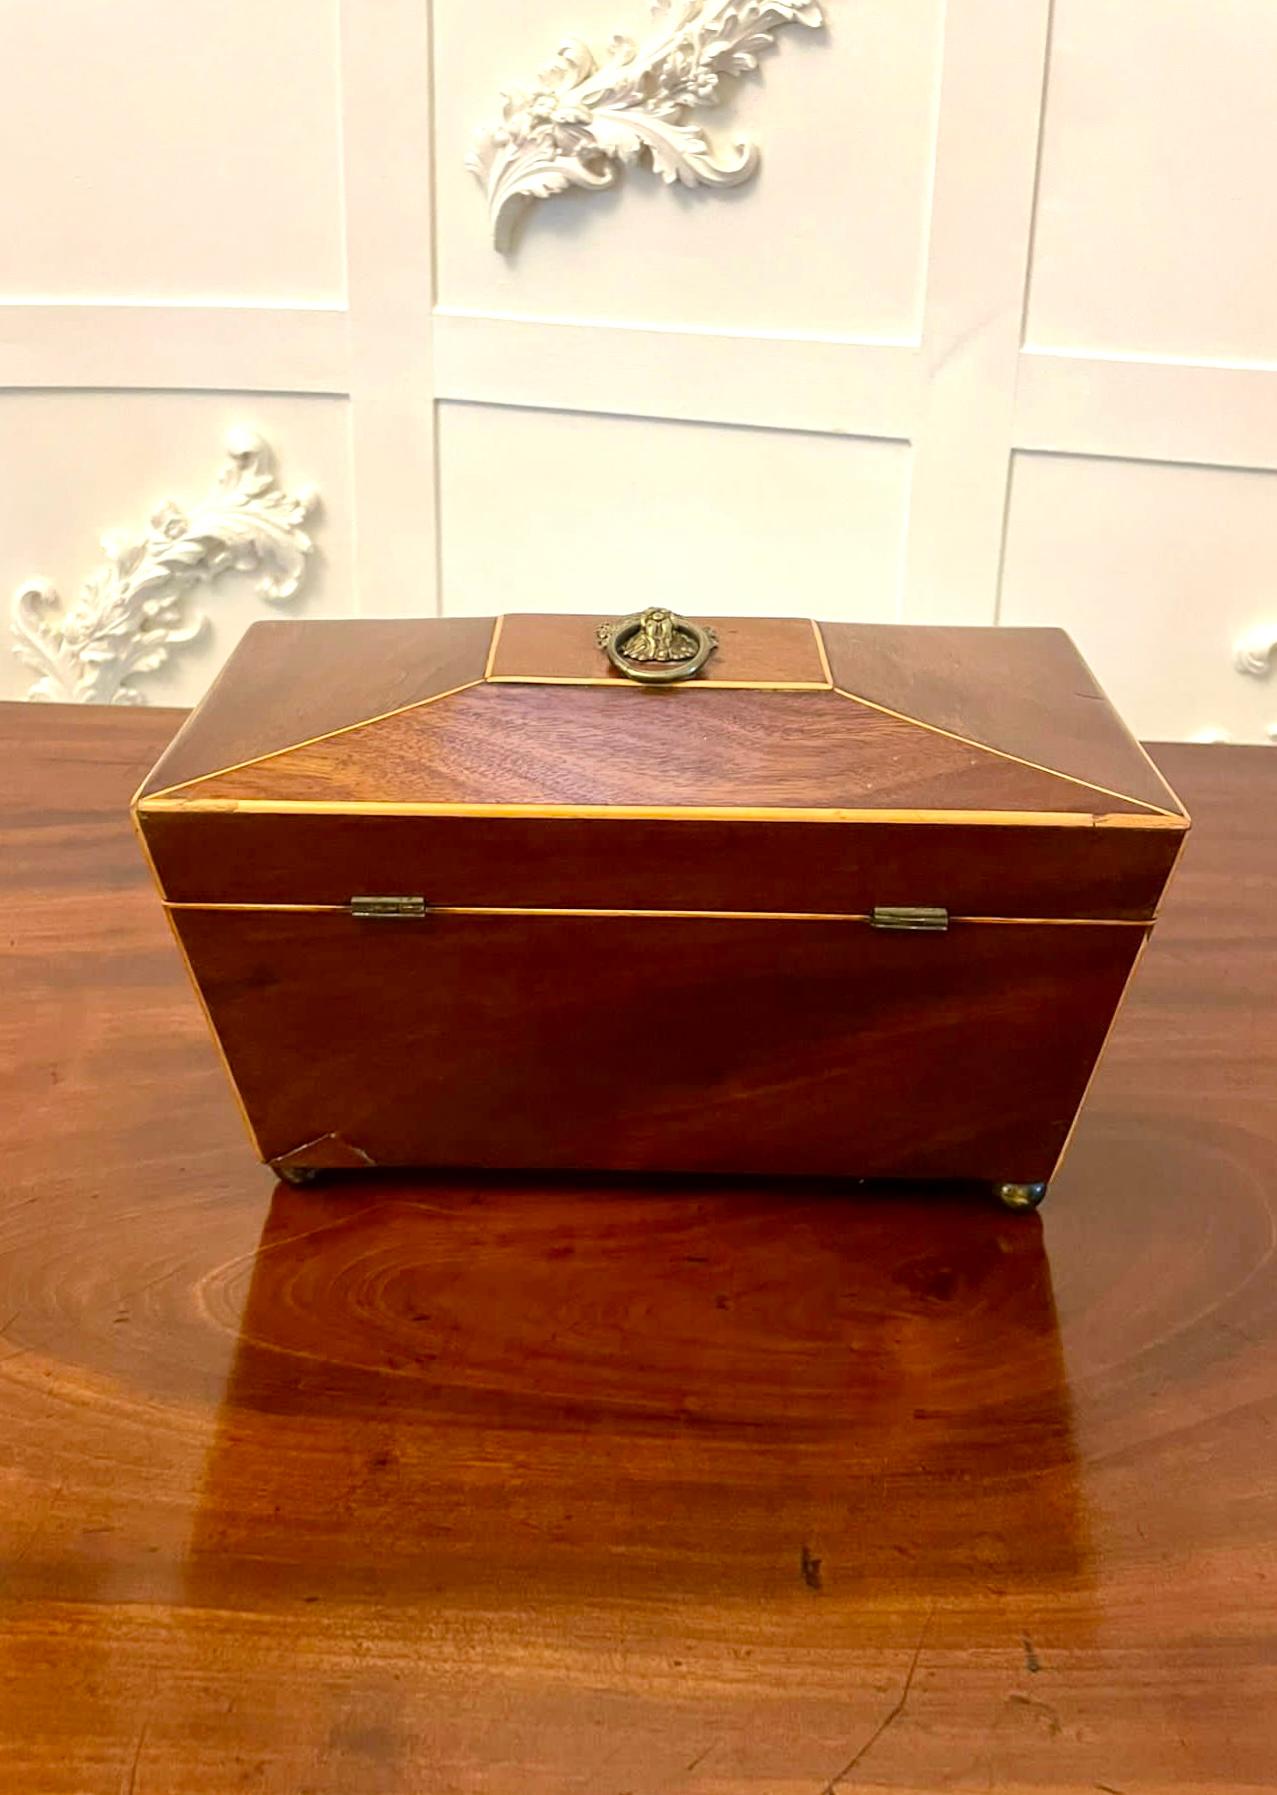 Antique Regency quality mahogany inlaid tea caddy having inlaid satinwood stringing, original ornate brass handles and escutcheon, lift up lid opening to reveal two tea caddies


Dimensions:
Height 16 cm 
Width 28.5 cm 
Depth 14 cm 


Dated 1825  
